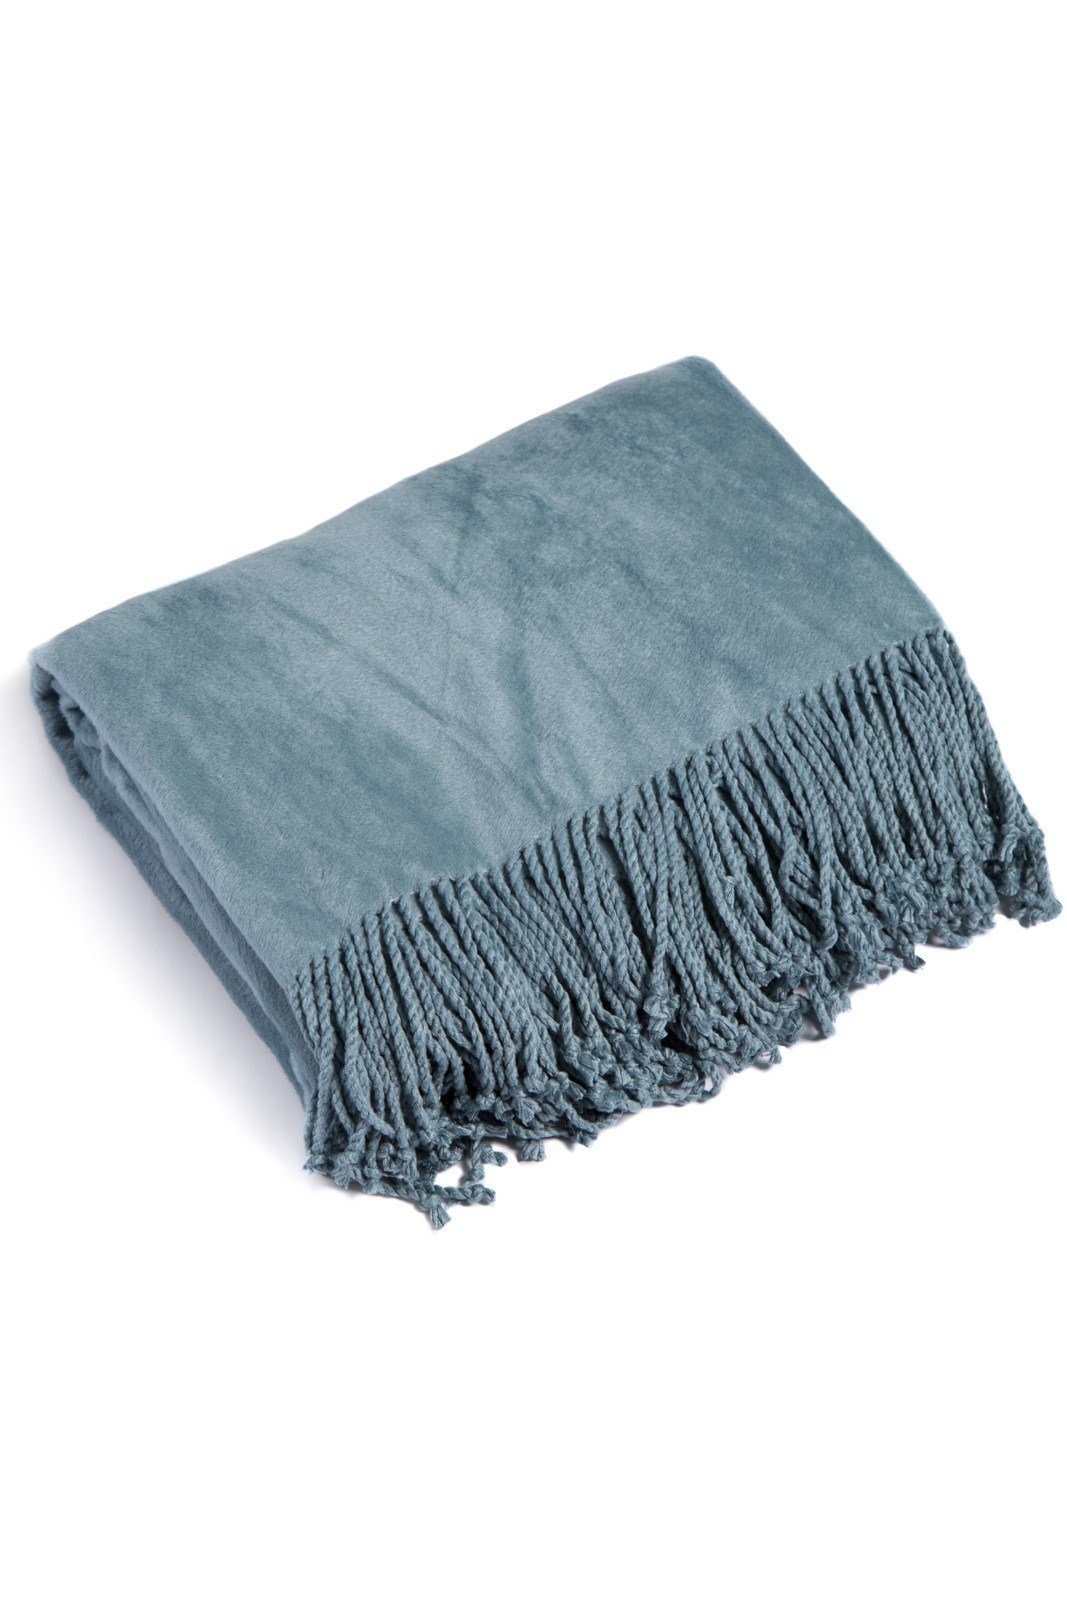 Micro Velvet Fleece Throw with Fringe and Gift Box - Fishers Finery